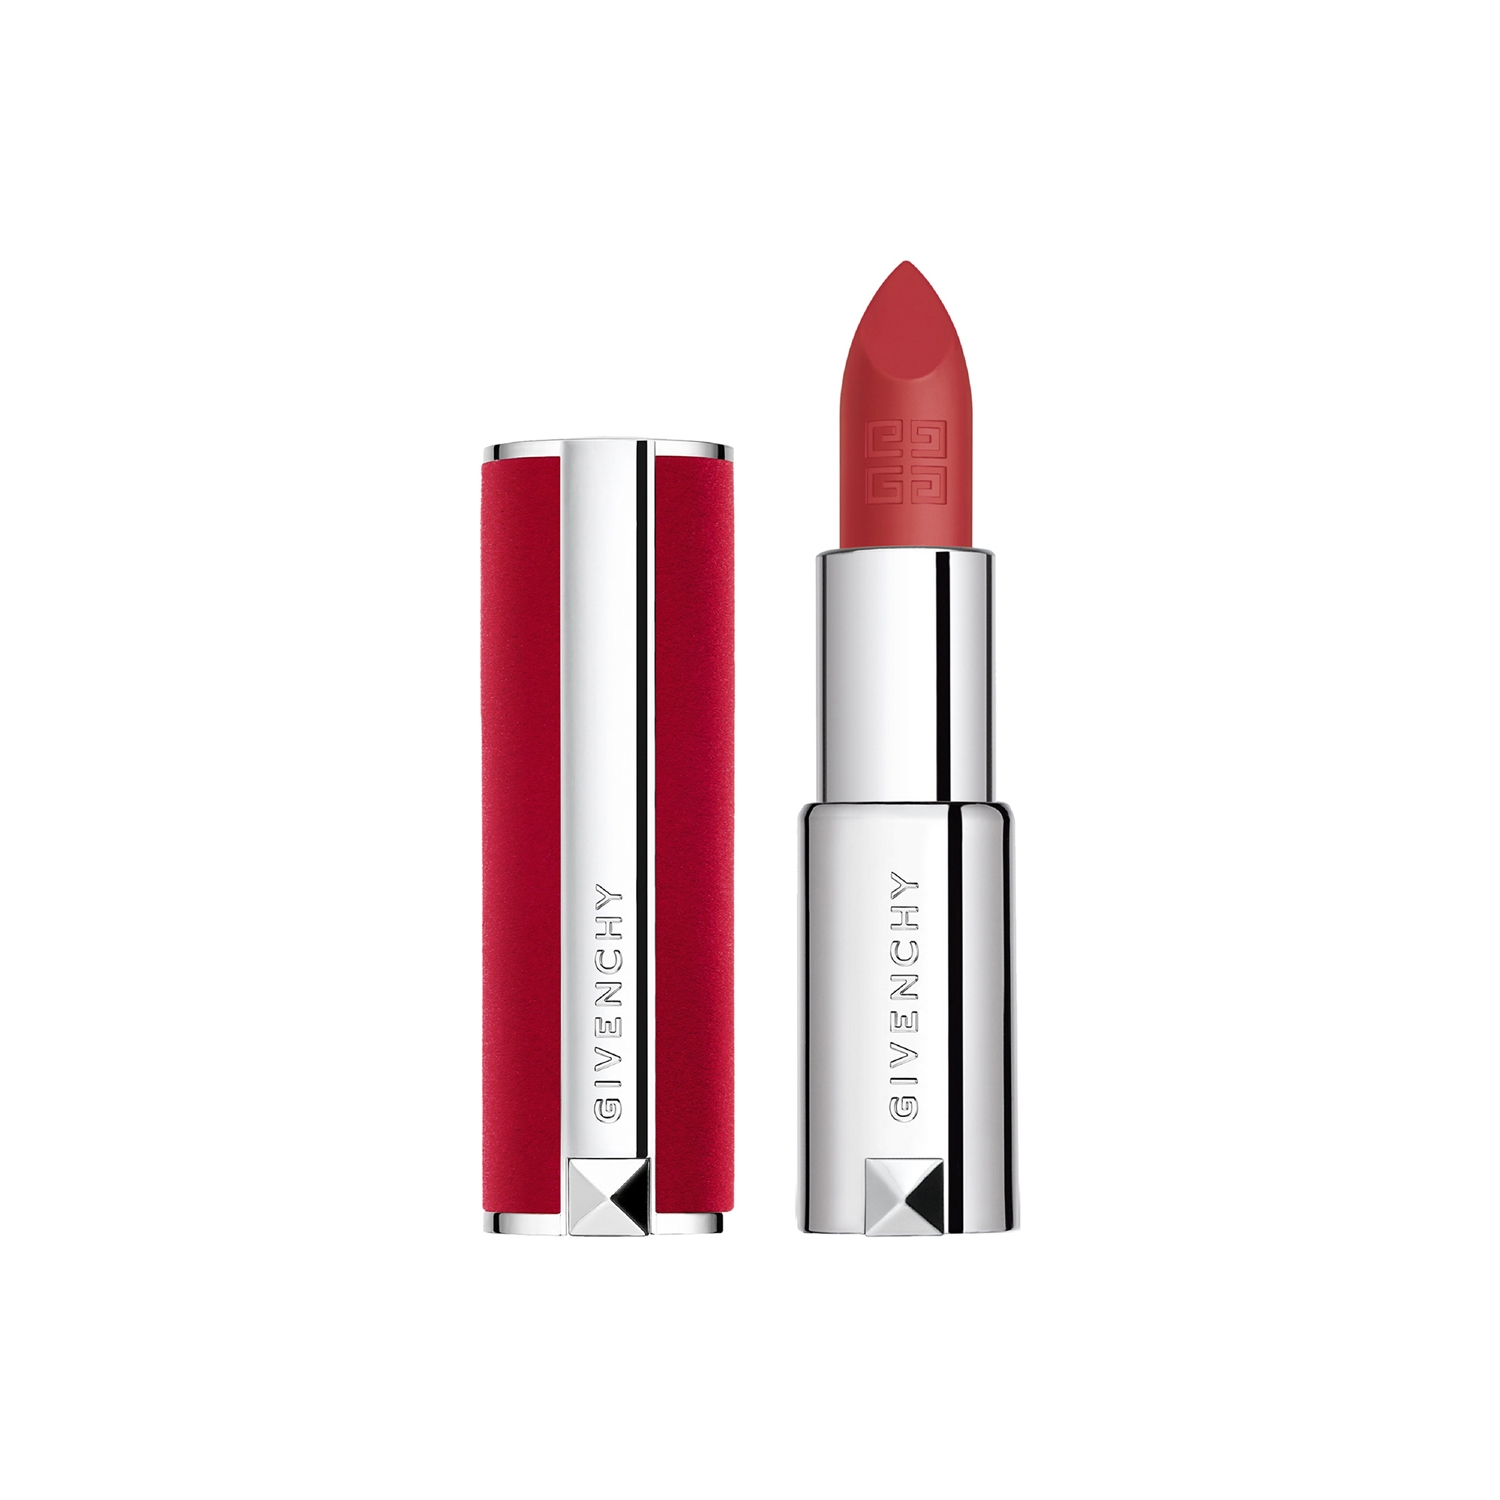 Givenchy | Givenchy Le Rouge Deep Velvet Lipstick - N 27 Rouge Infuse (3.4g)